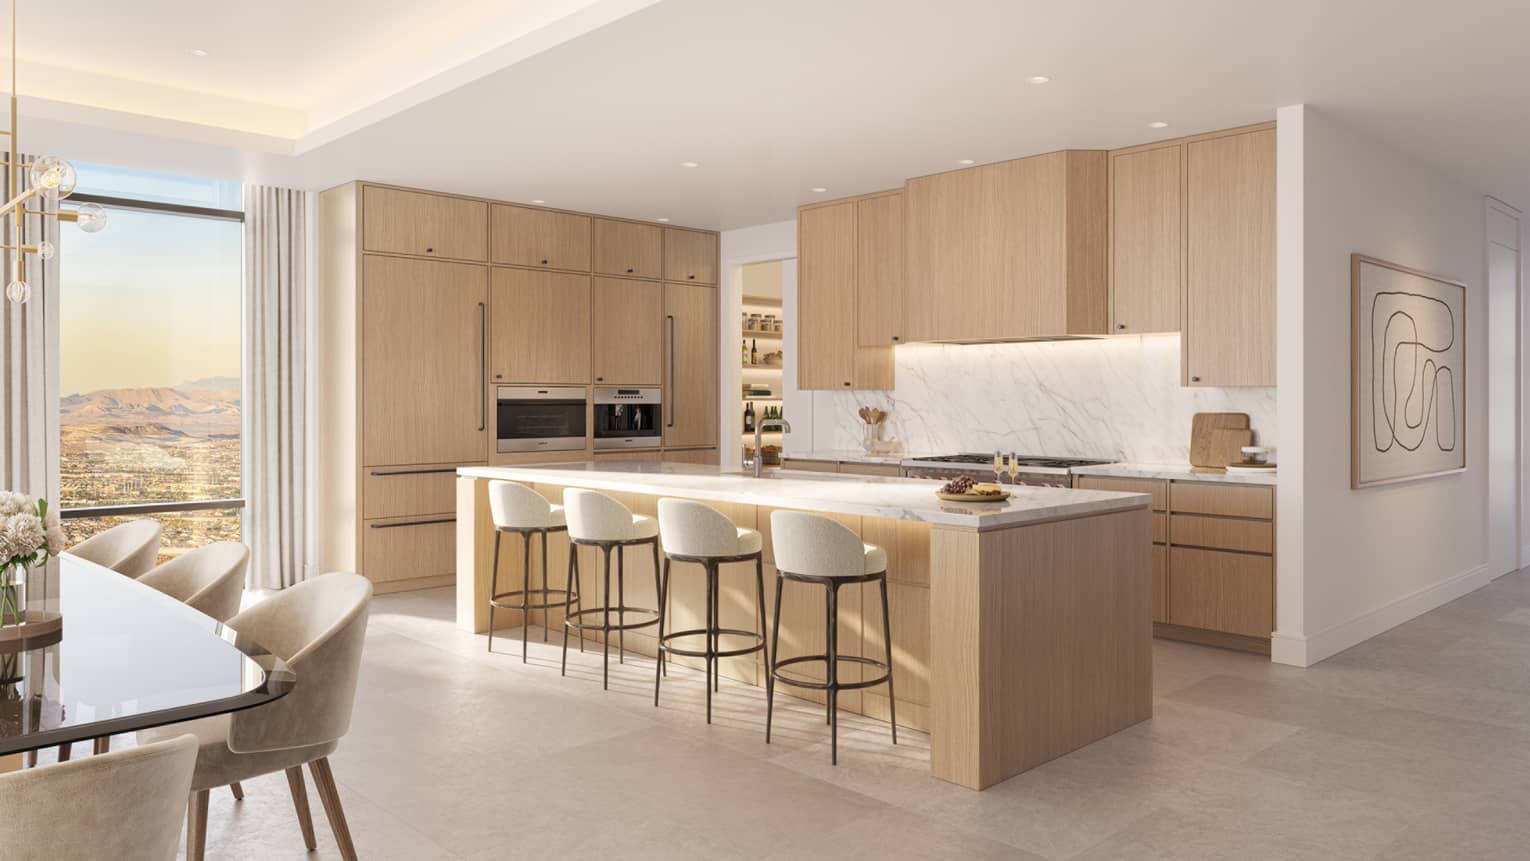 Rendering of residence kitchen and bar area